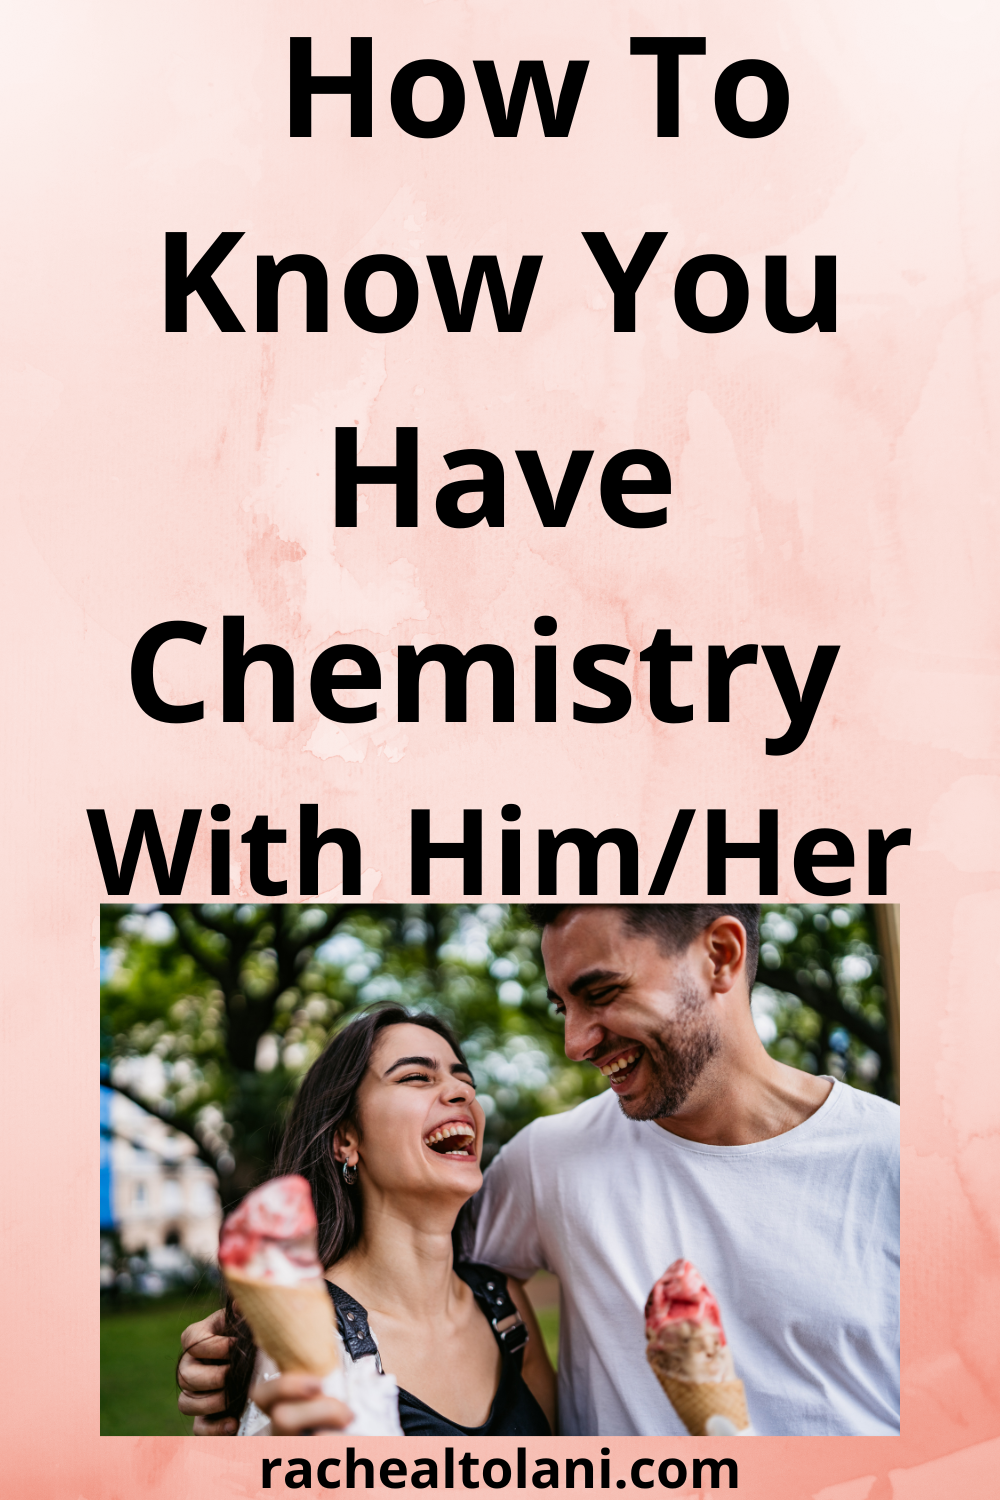 Signs That Two People Have Chemistry